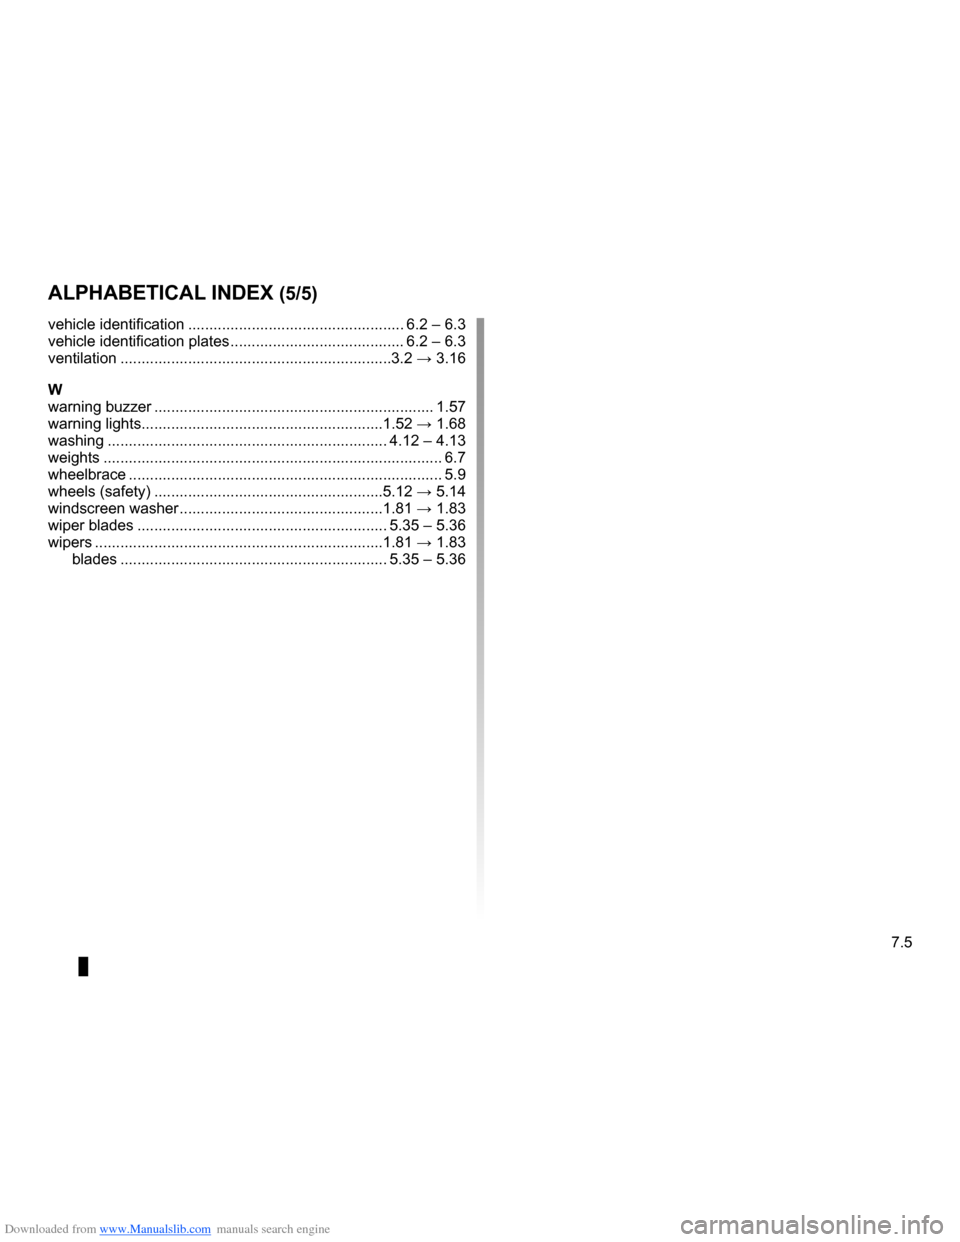 RENAULT CLIO 2009 X85 / 3.G Owners Manual Downloaded from www.Manualslib.com manuals search engine 
JauneNoirNoir texte

7.5
FRA_UD14717_4Index (X85 - B85 - C85 - S85 - K85 - Renault)ENG_NU_853-3_BCSK85_Renault_7

vehicle identification .....